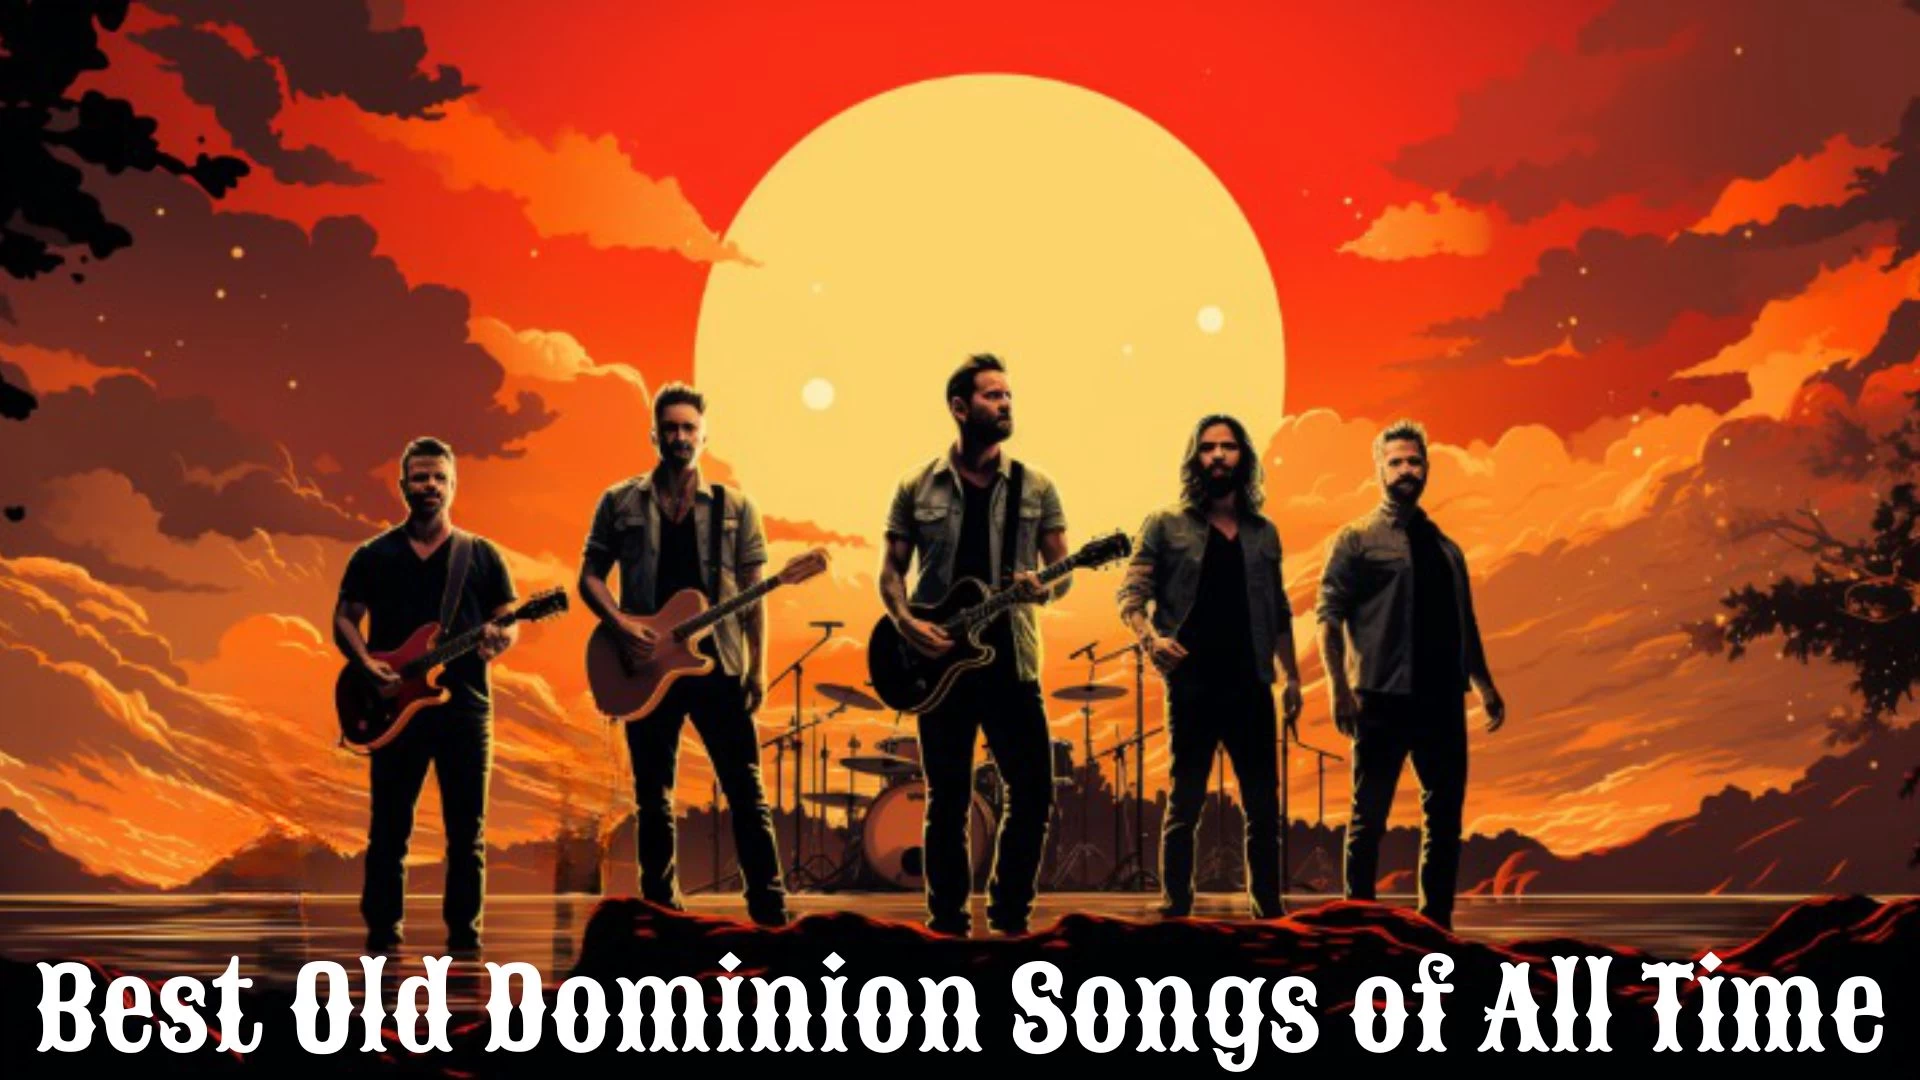 Best Old Dominion Songs of All Time - Top 10 Heartfelt Ballads